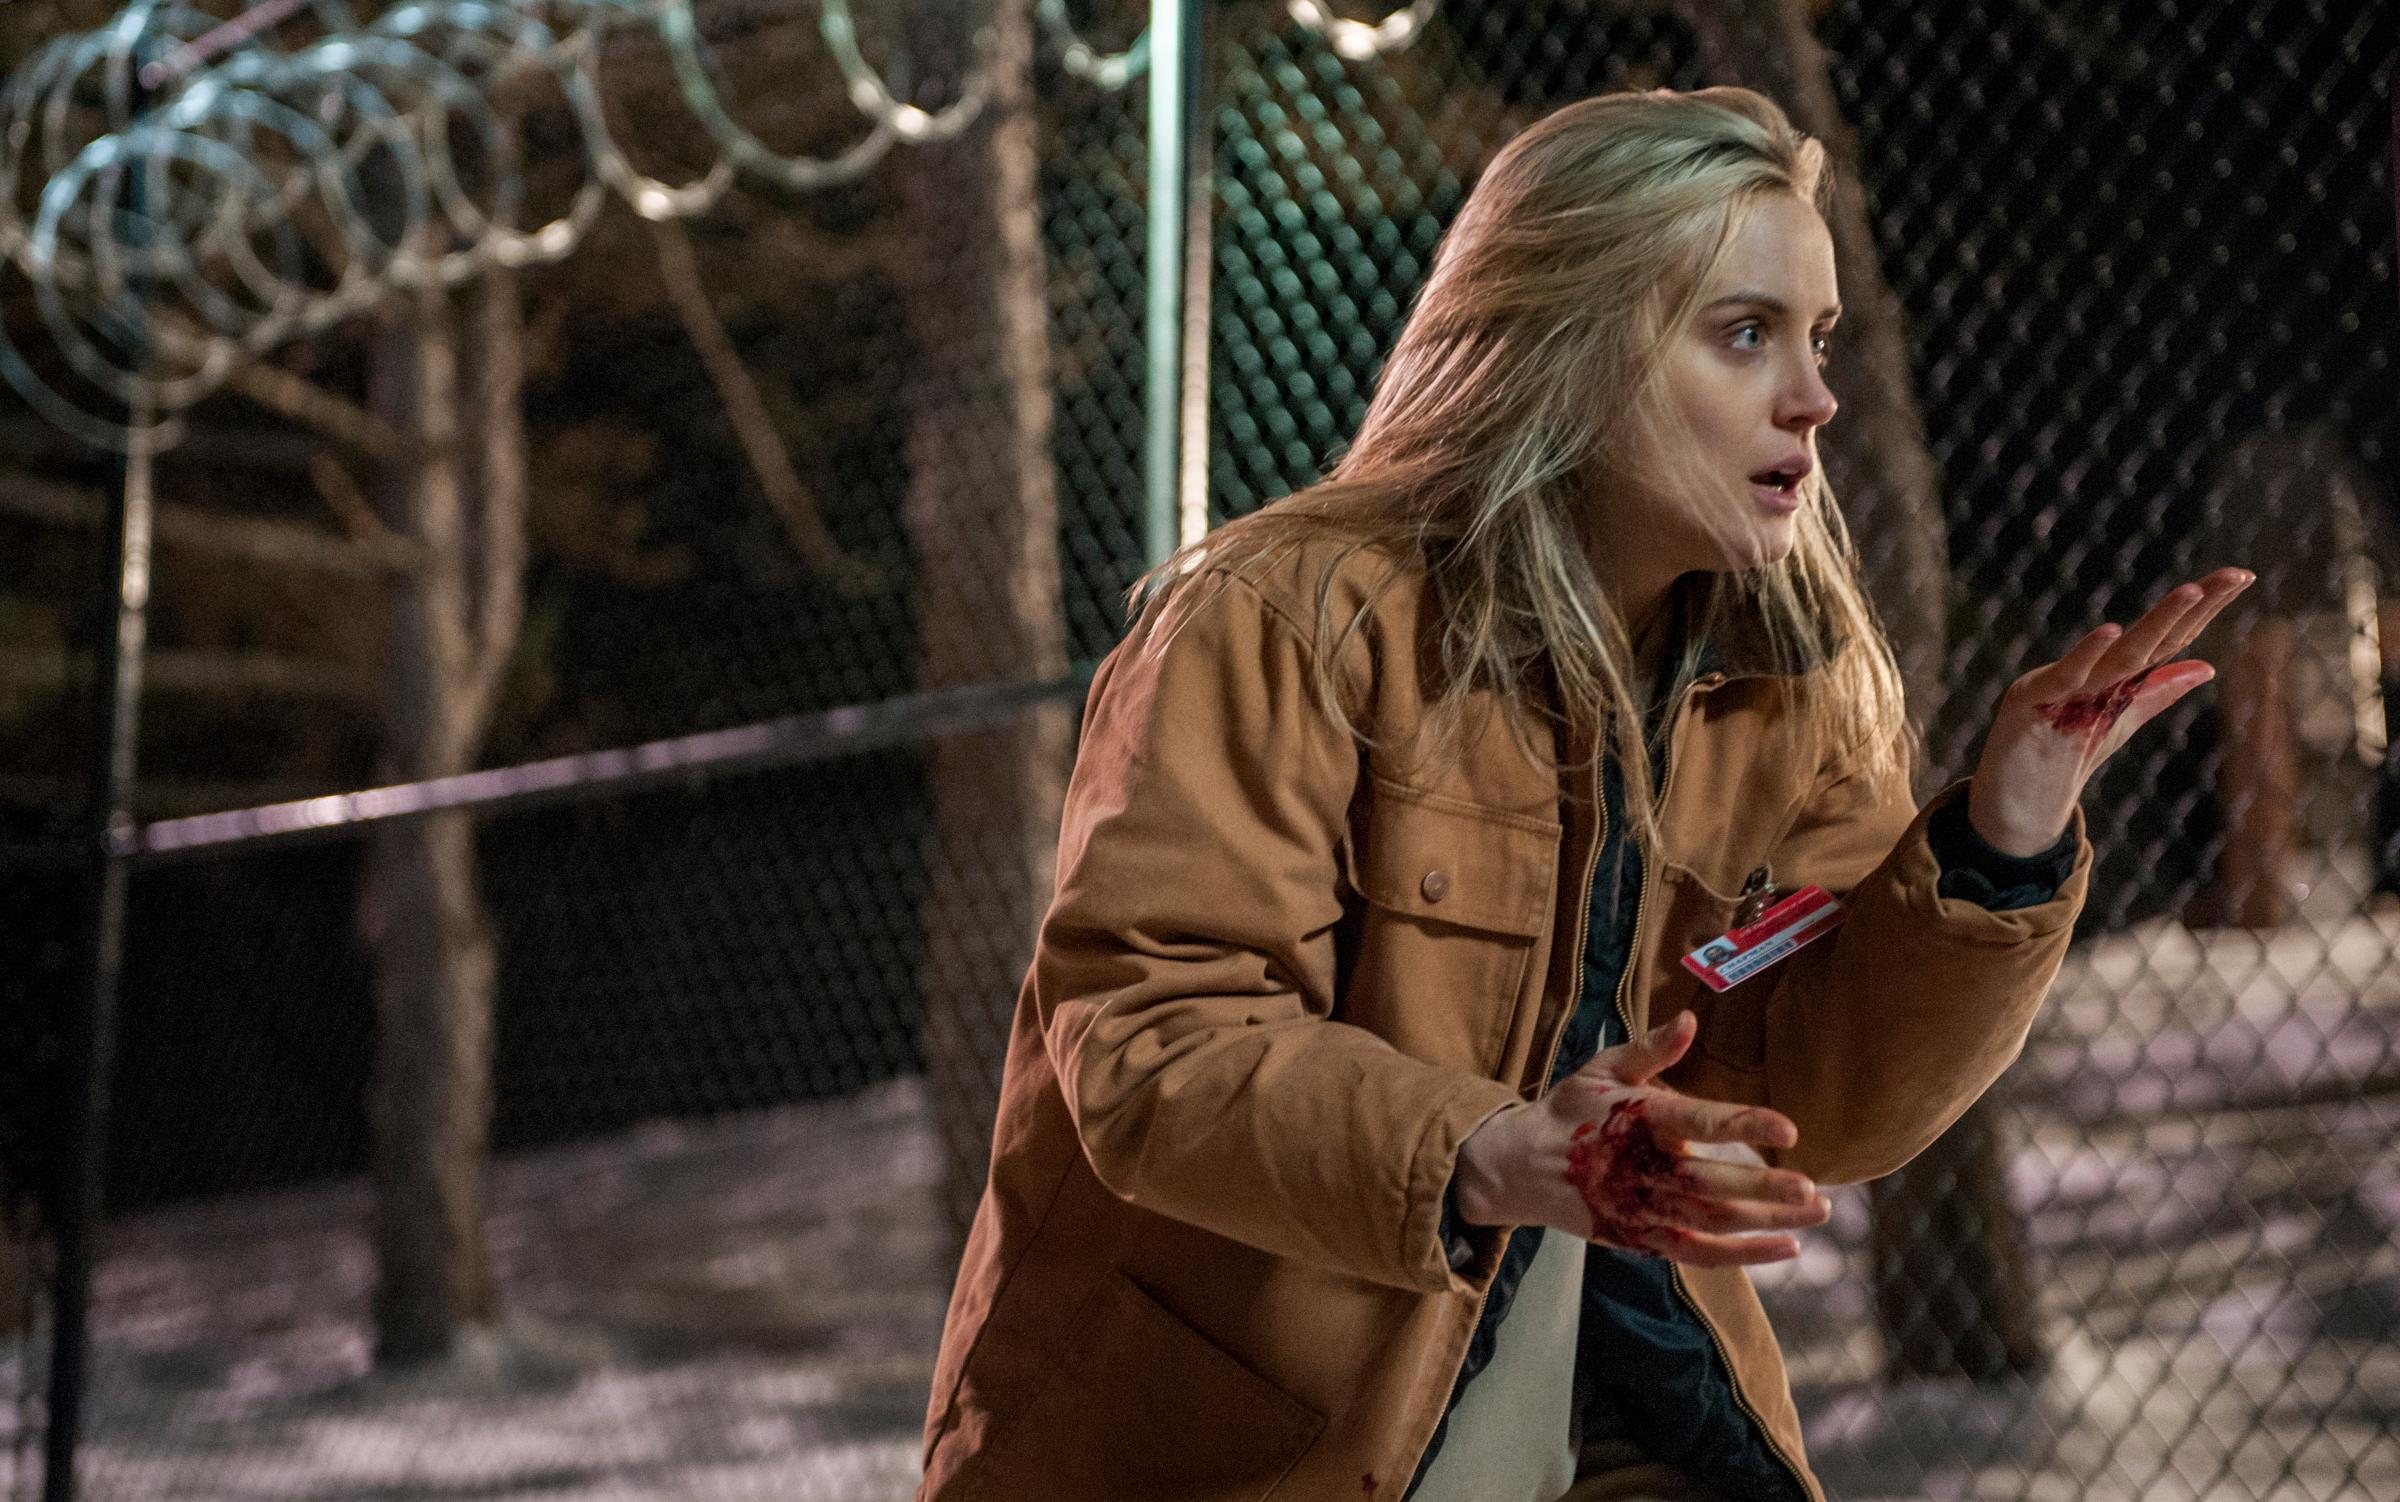 Taylor Schilling in a scene from NetflixÕs ÒOrange is the New BlackÓ Season 2. Photo credit: Jessica Miglio for Netflix.